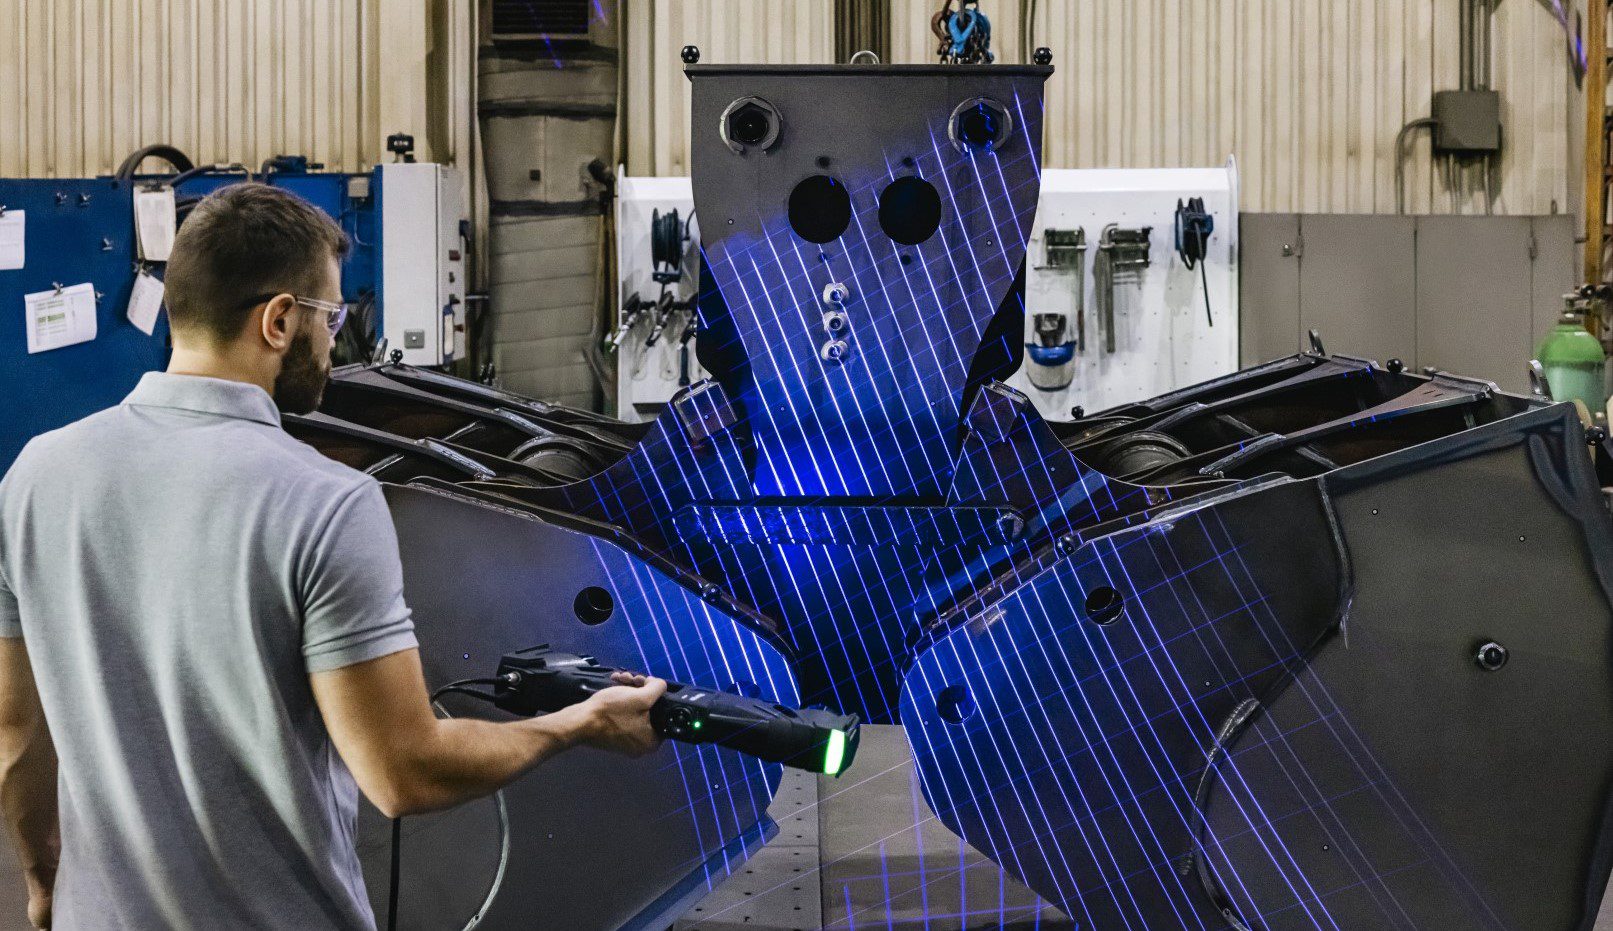 Image shows a man 3D scanning a large assembly with HandySCAN 3D MAX from Creaform